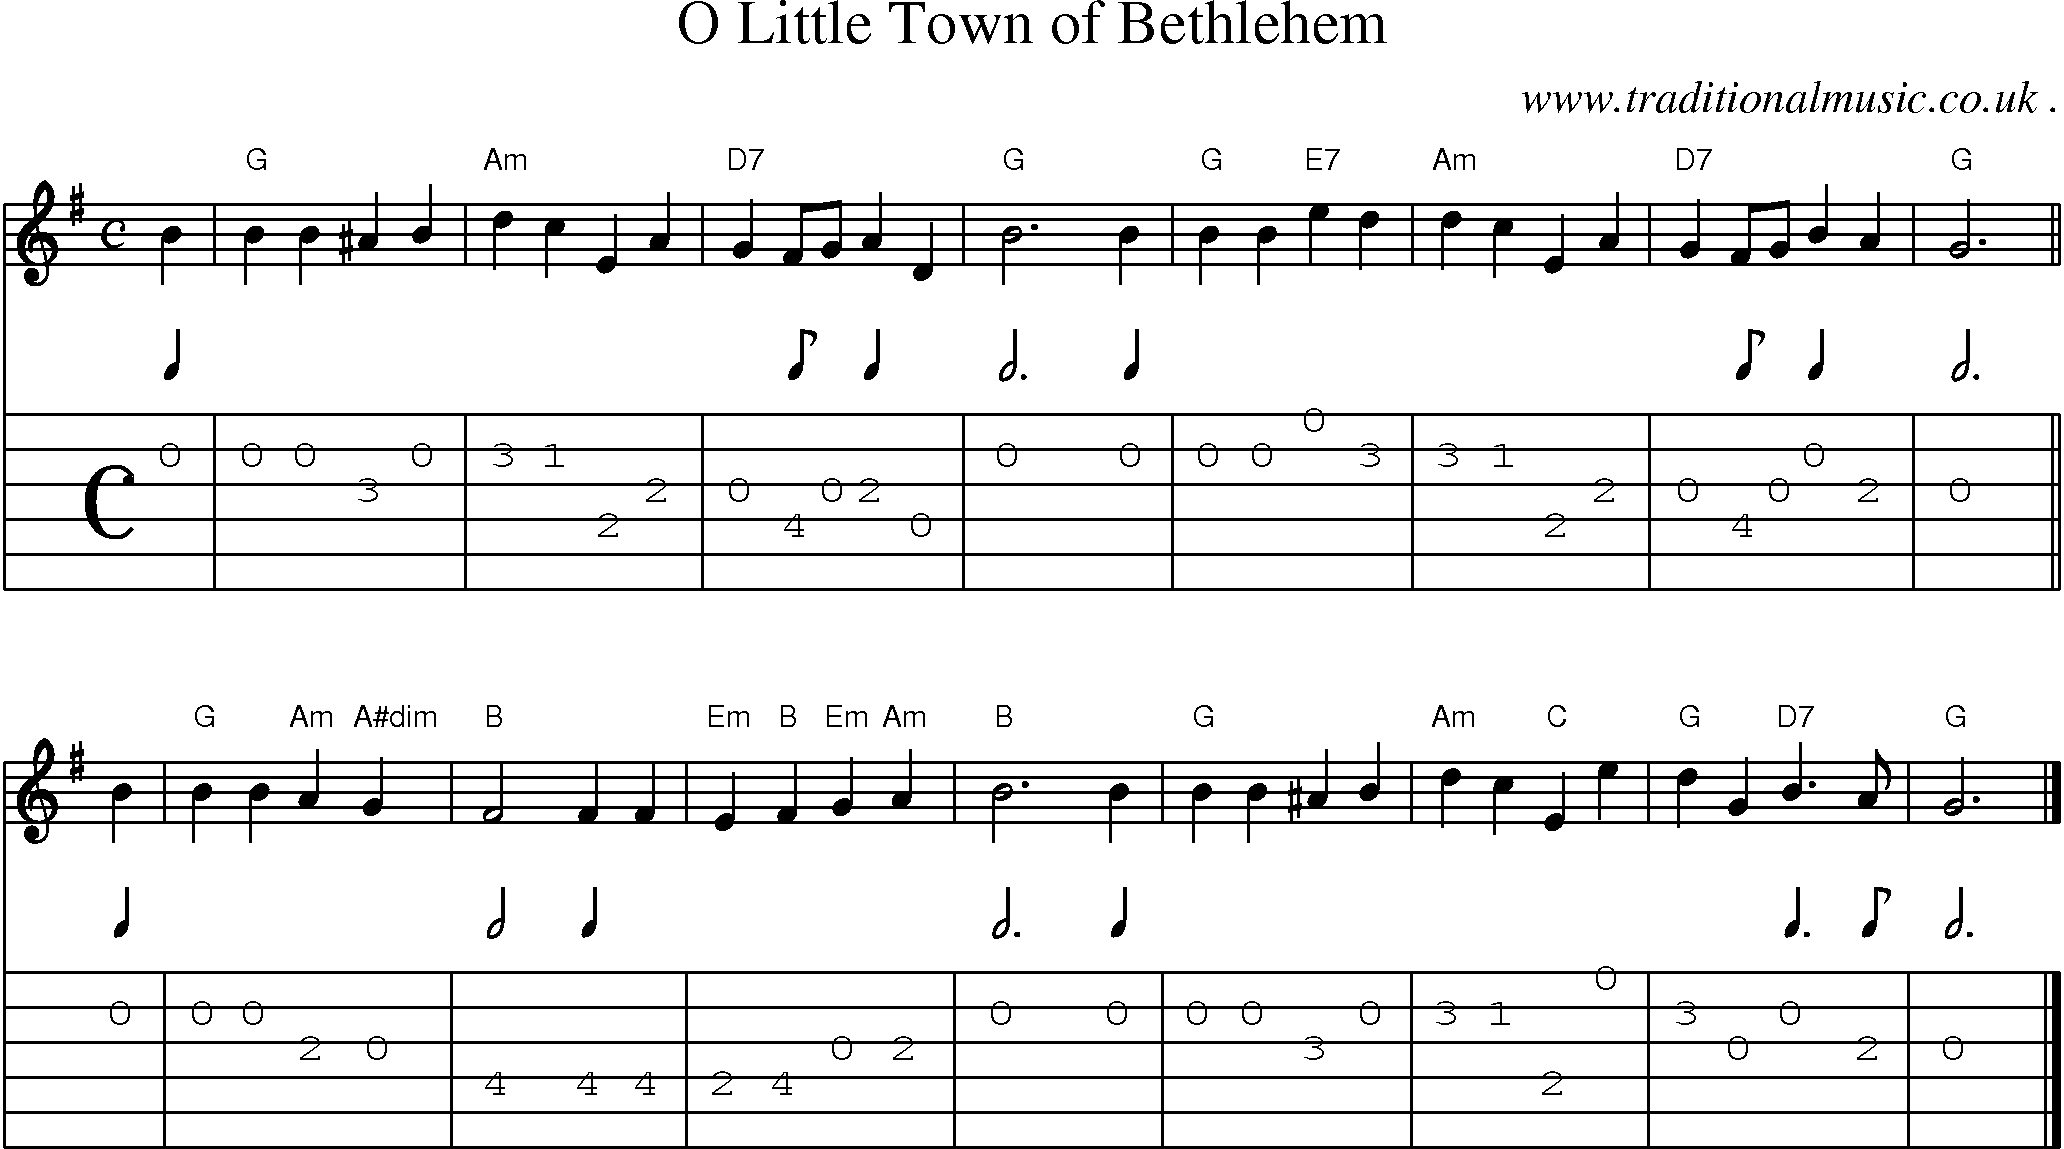 Sheet-music  score, Chords and Guitar Tabs for O Little Town Of Bethlehem